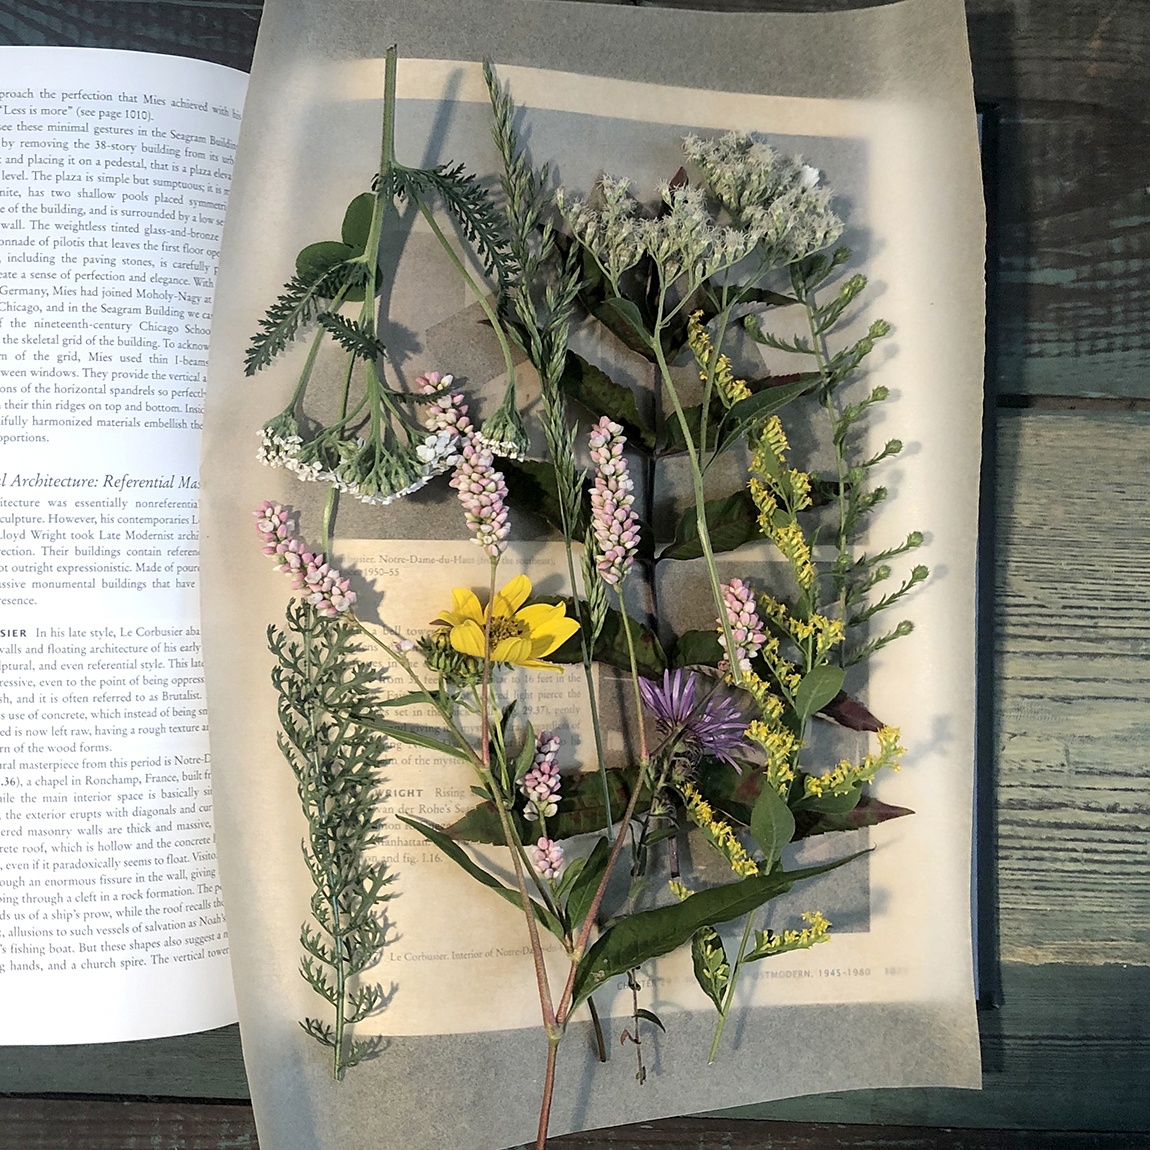 An assortment of flowers and leaves on a piece of wax paper, sitting on a book.